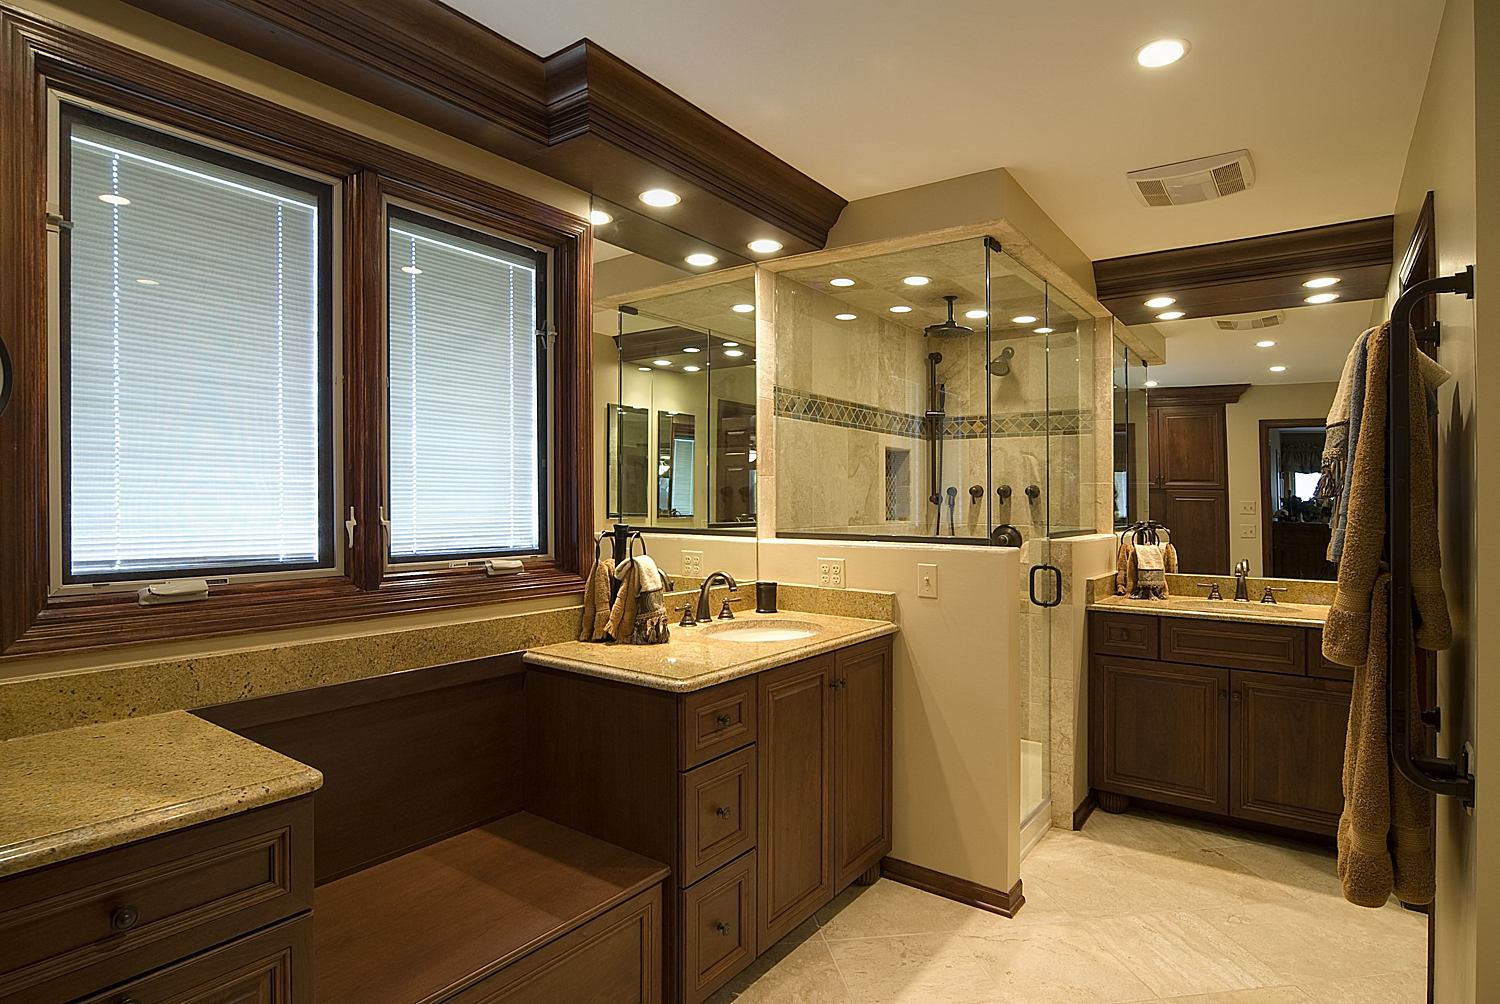 Bathroom Remodeling With Fascinating Bathroom Remodeling Ideas Matched With Wooden Furniture Of Vanity Completed With Sink Also Large Mirror And Furnished With Towel Rack Bathroom Chinese Bathroom Remodeling Ideas